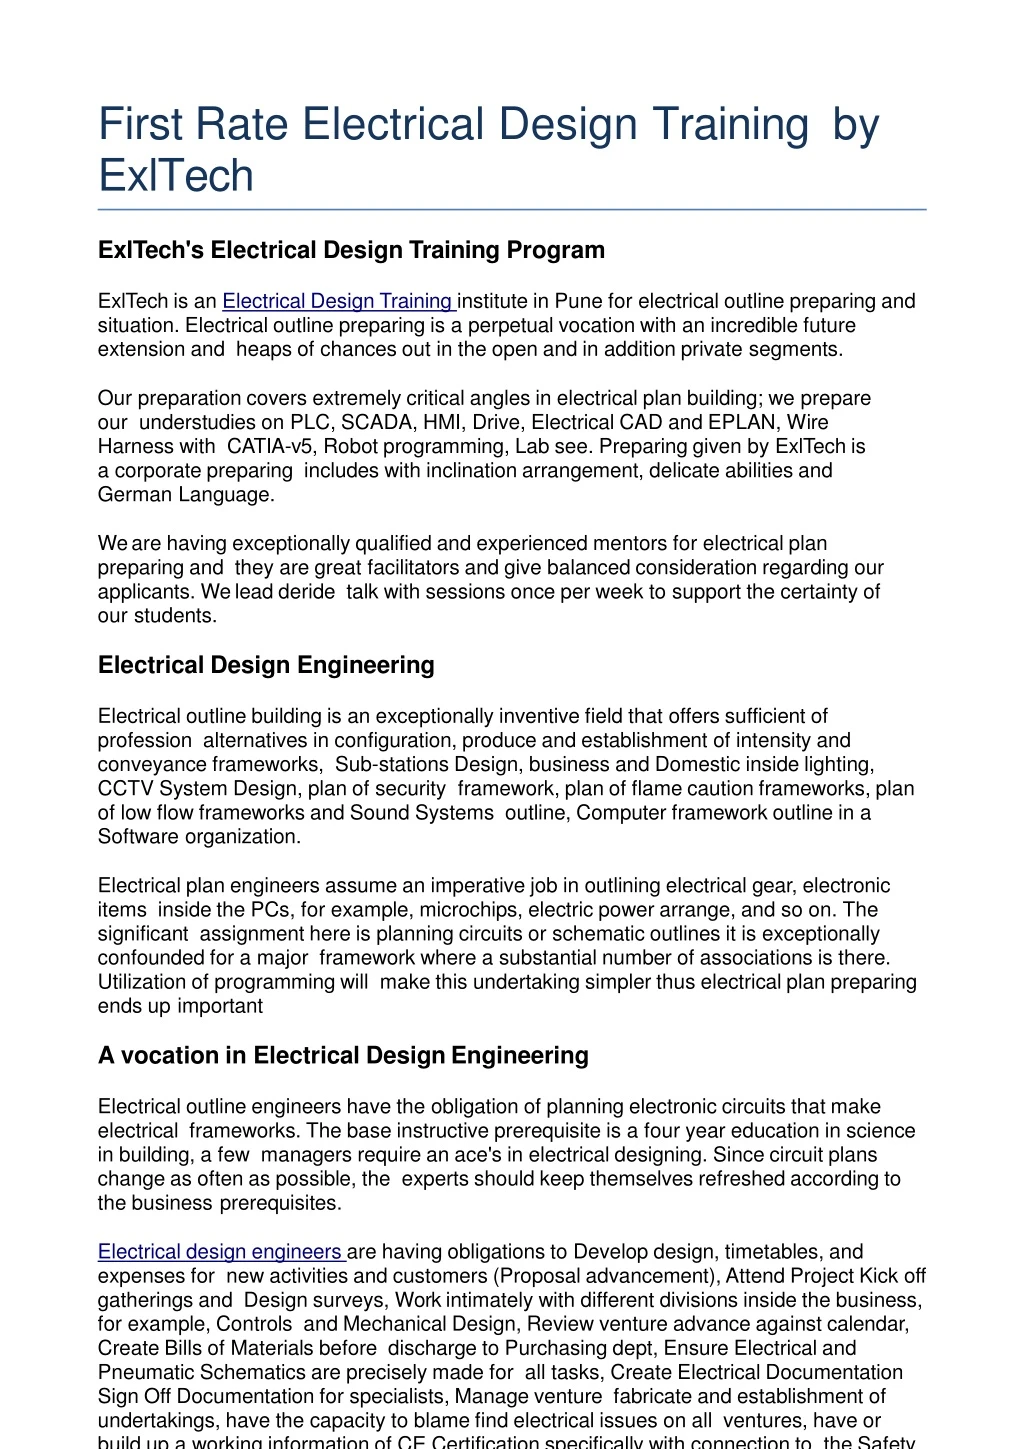 first rate electrical design training by exltech